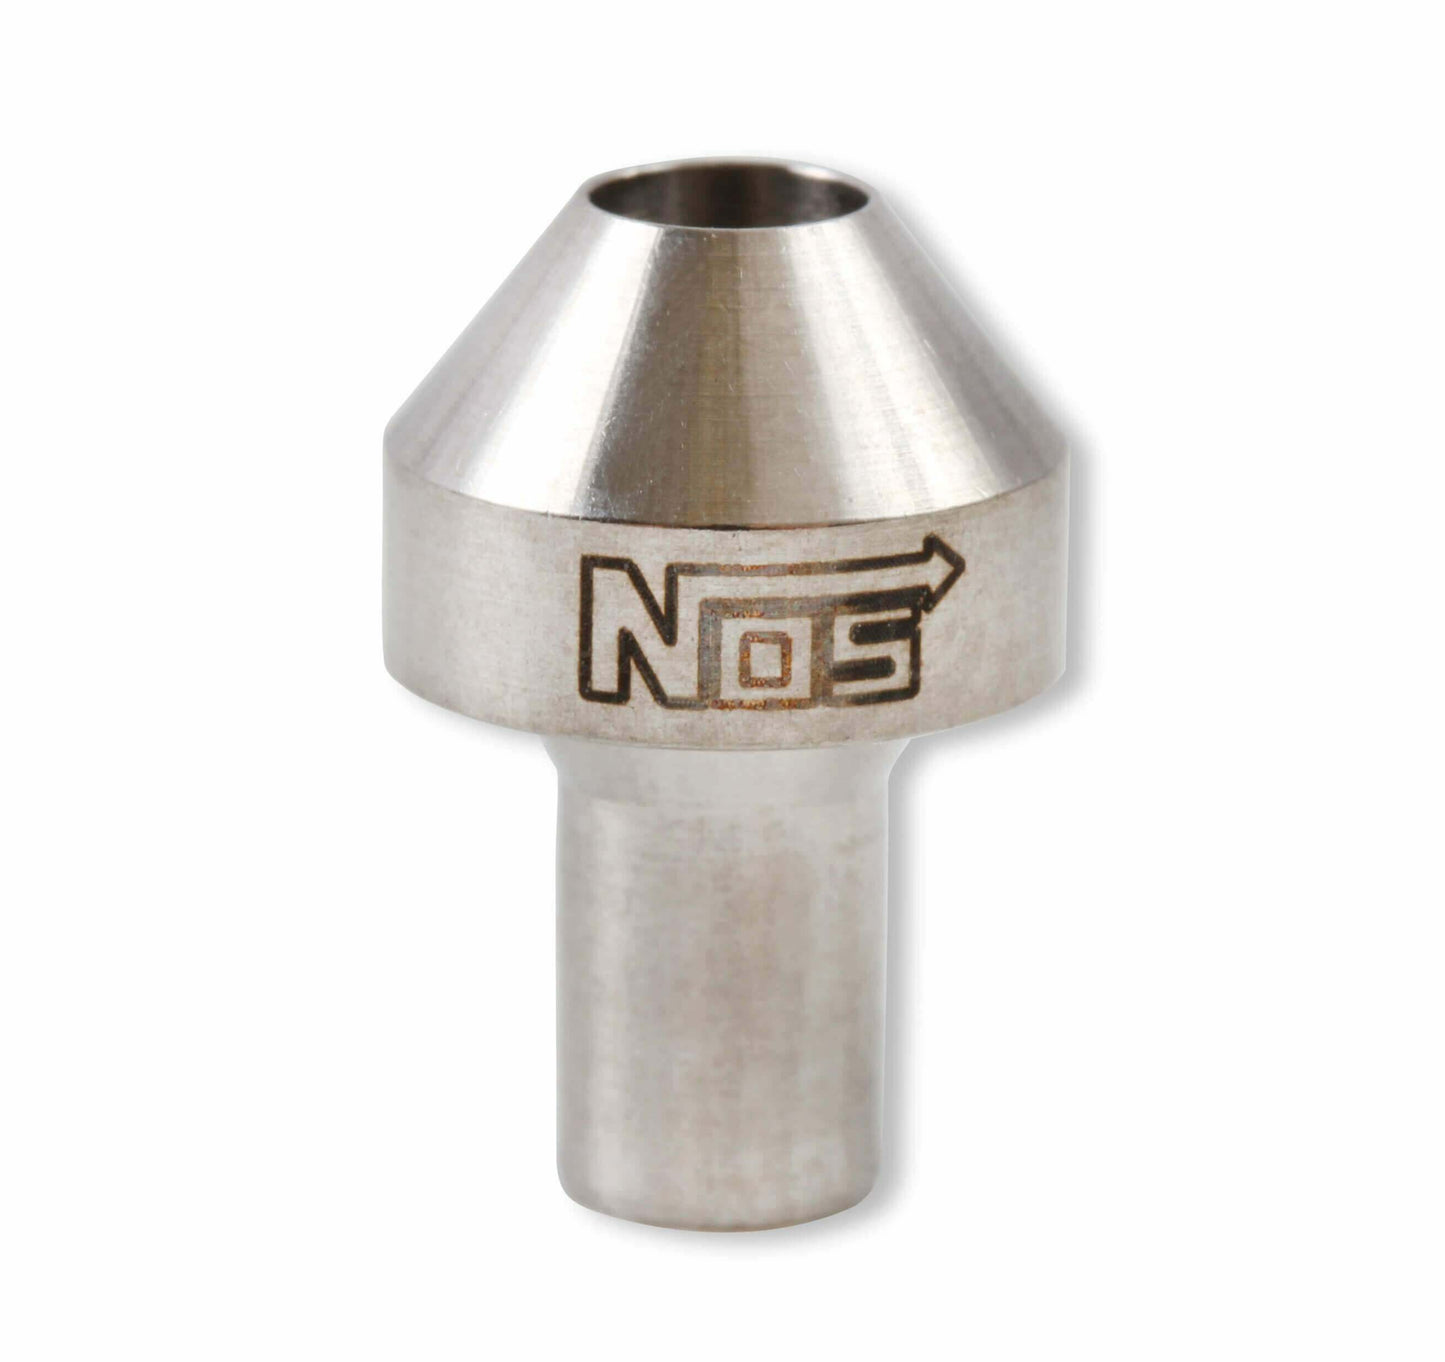 NOS Precision SS Stainless Steel Nitrous Flare Jet .030 8 pack - 13760-30-8NOS